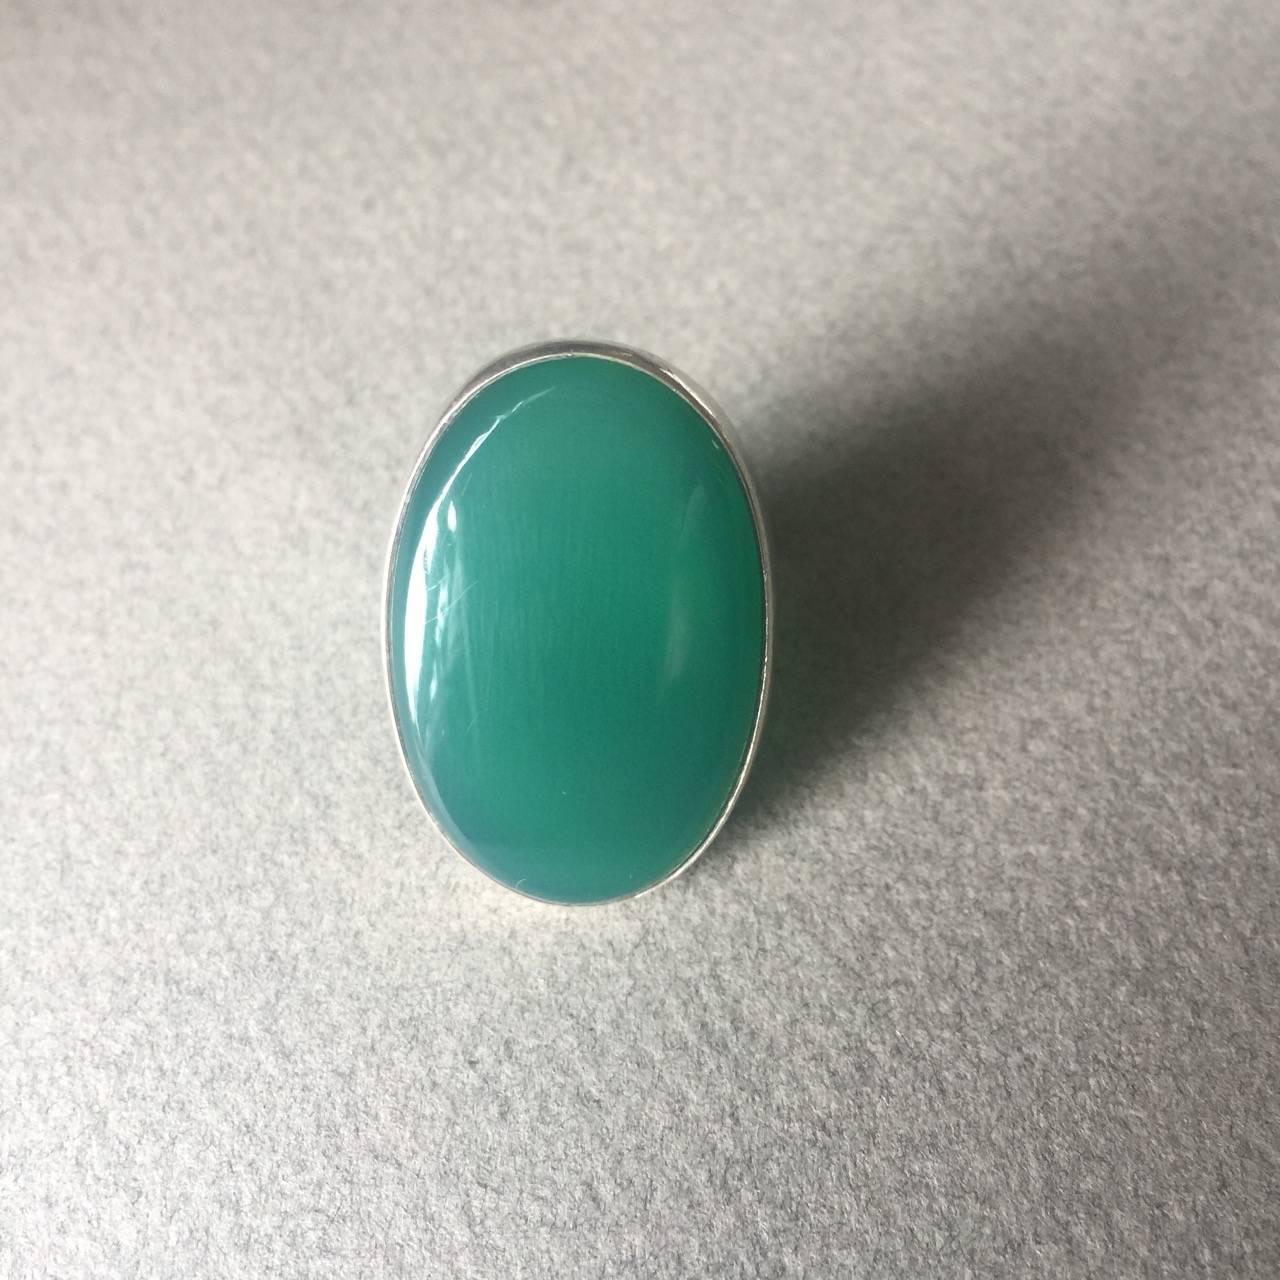 Georg Jensen Modernist Sterling Silver Ring No. 90A with Chrysoprase.

Large domed Chrysoprase Cabochon. There are natural inclusions in the stone.

The open back adds to the beautiful translucency of the stone. 

Ring Size: 7.5

Complimentary gift